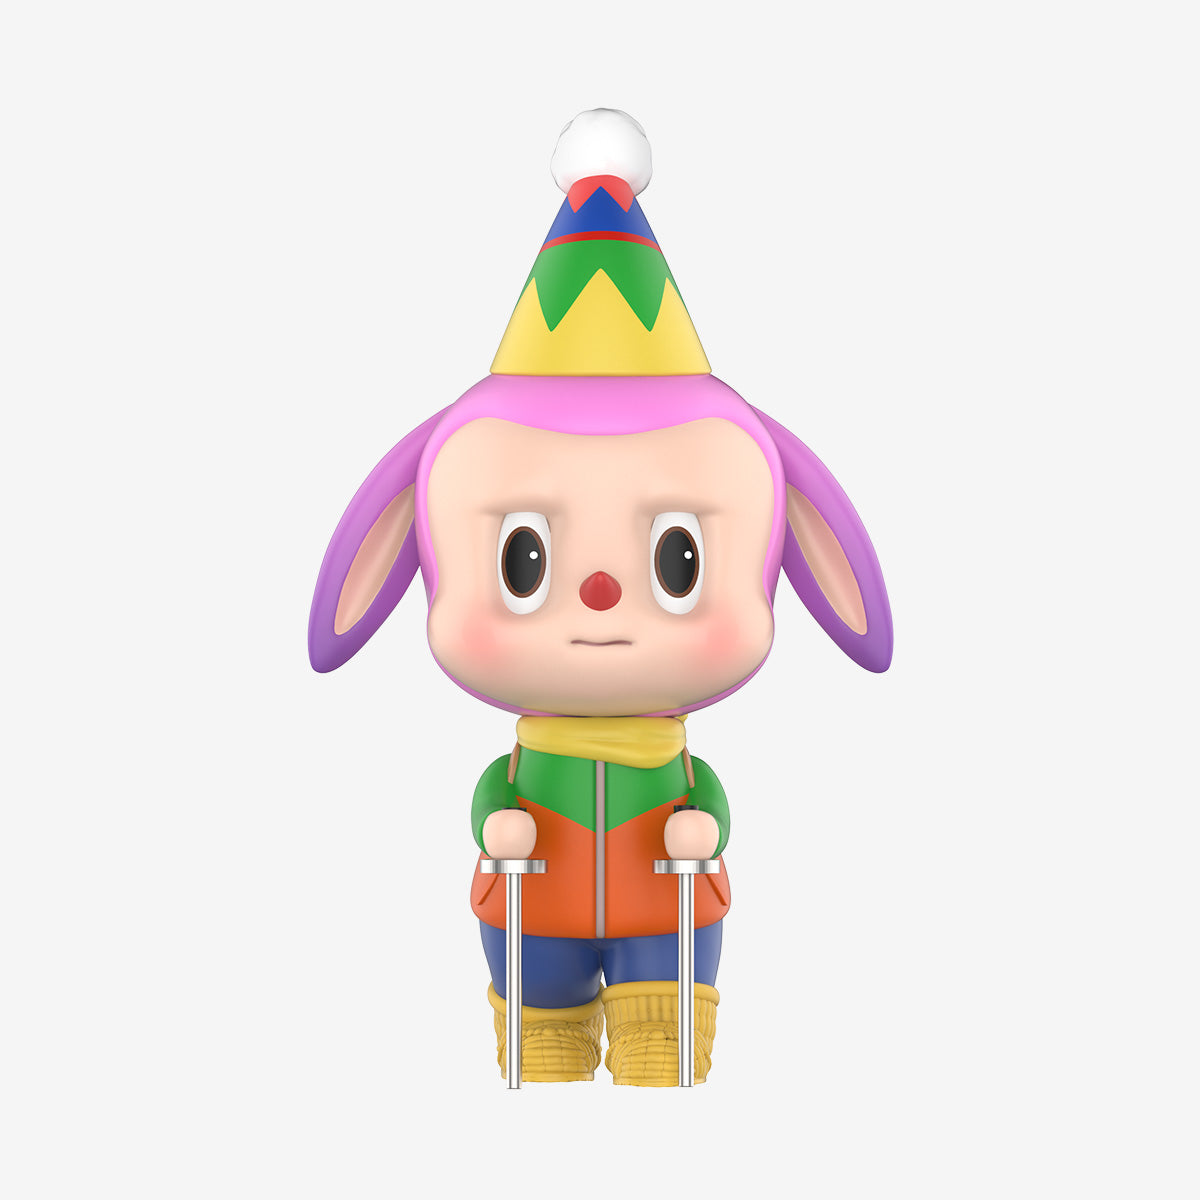 【Restock】Pop Mart The Monsters Camping Series Blind Box Figure